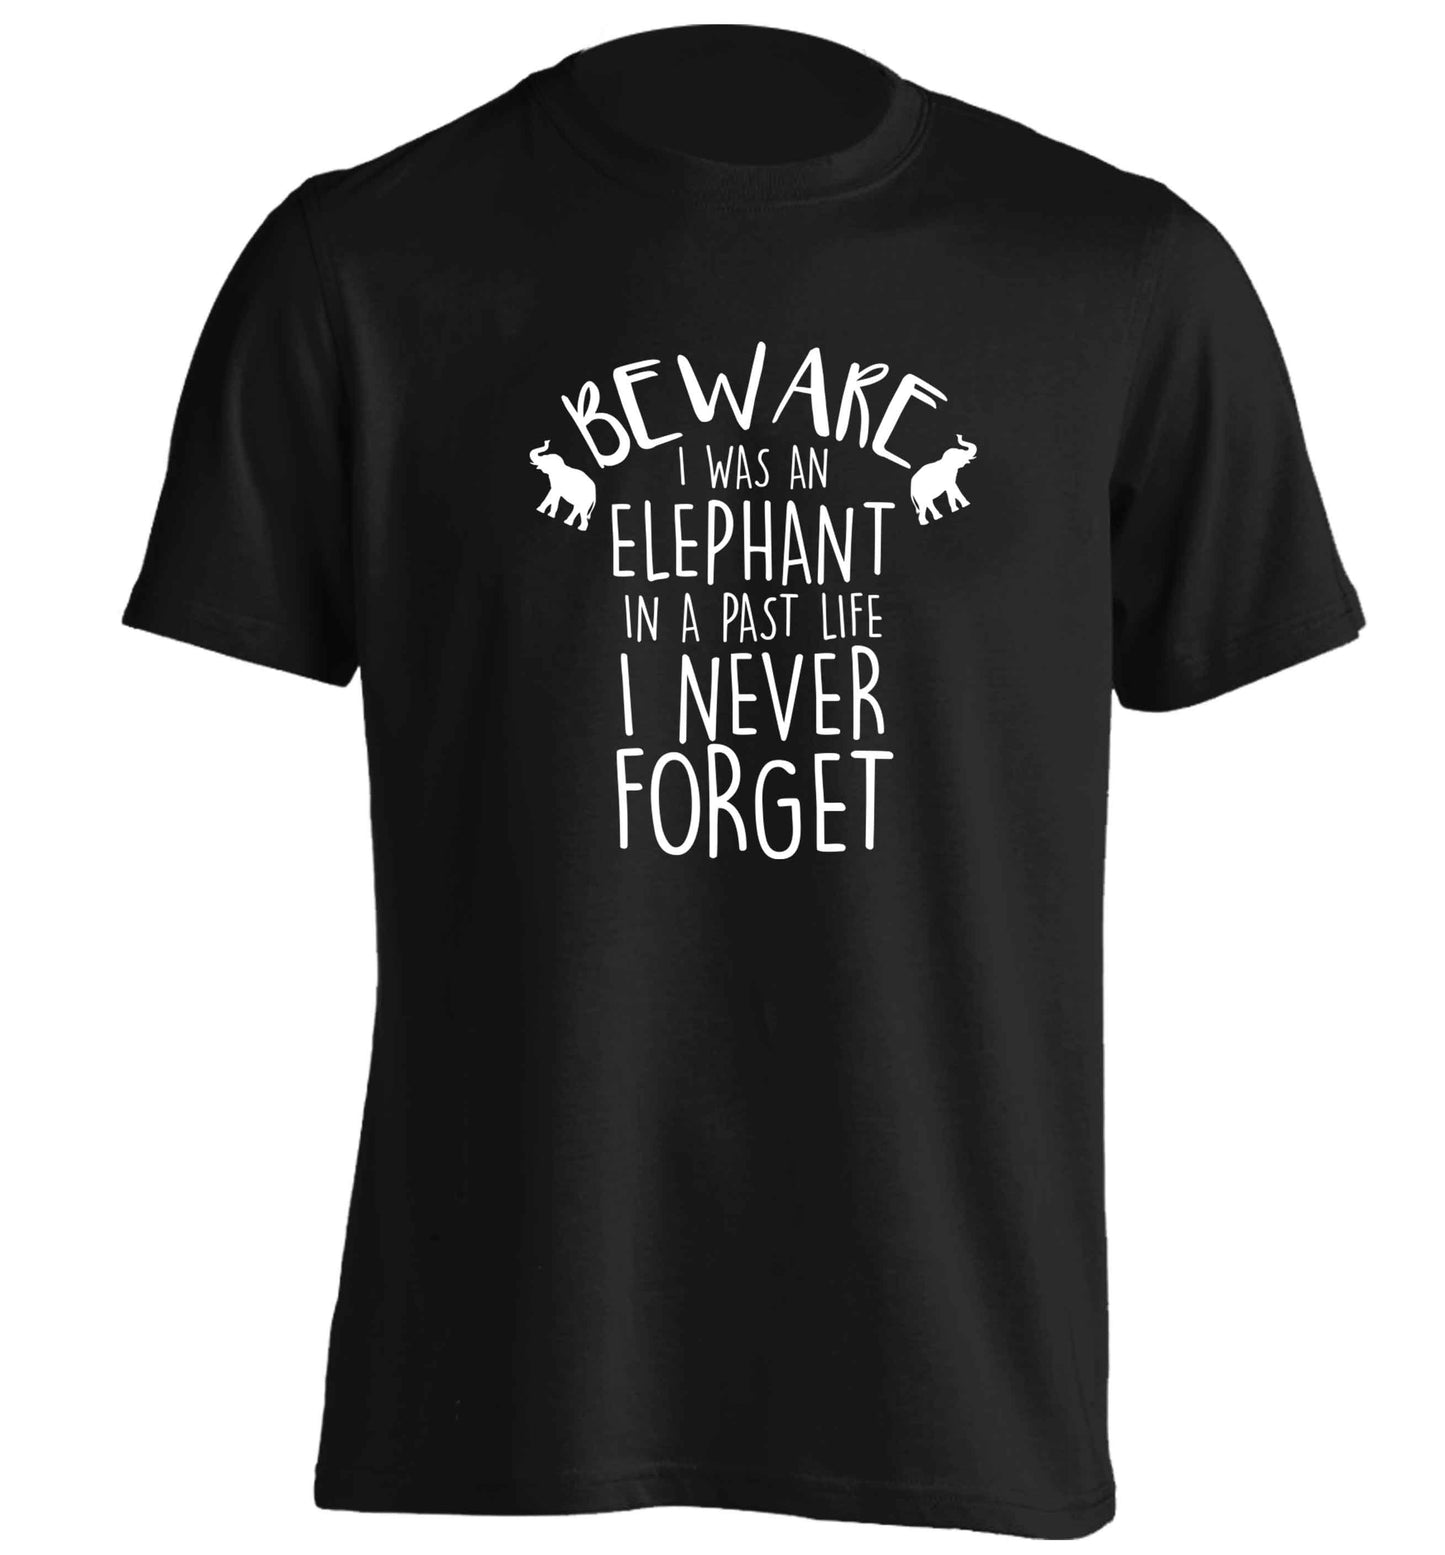 Beware I was an elephant in my past life I never forget adults unisex black Tshirt 2XL